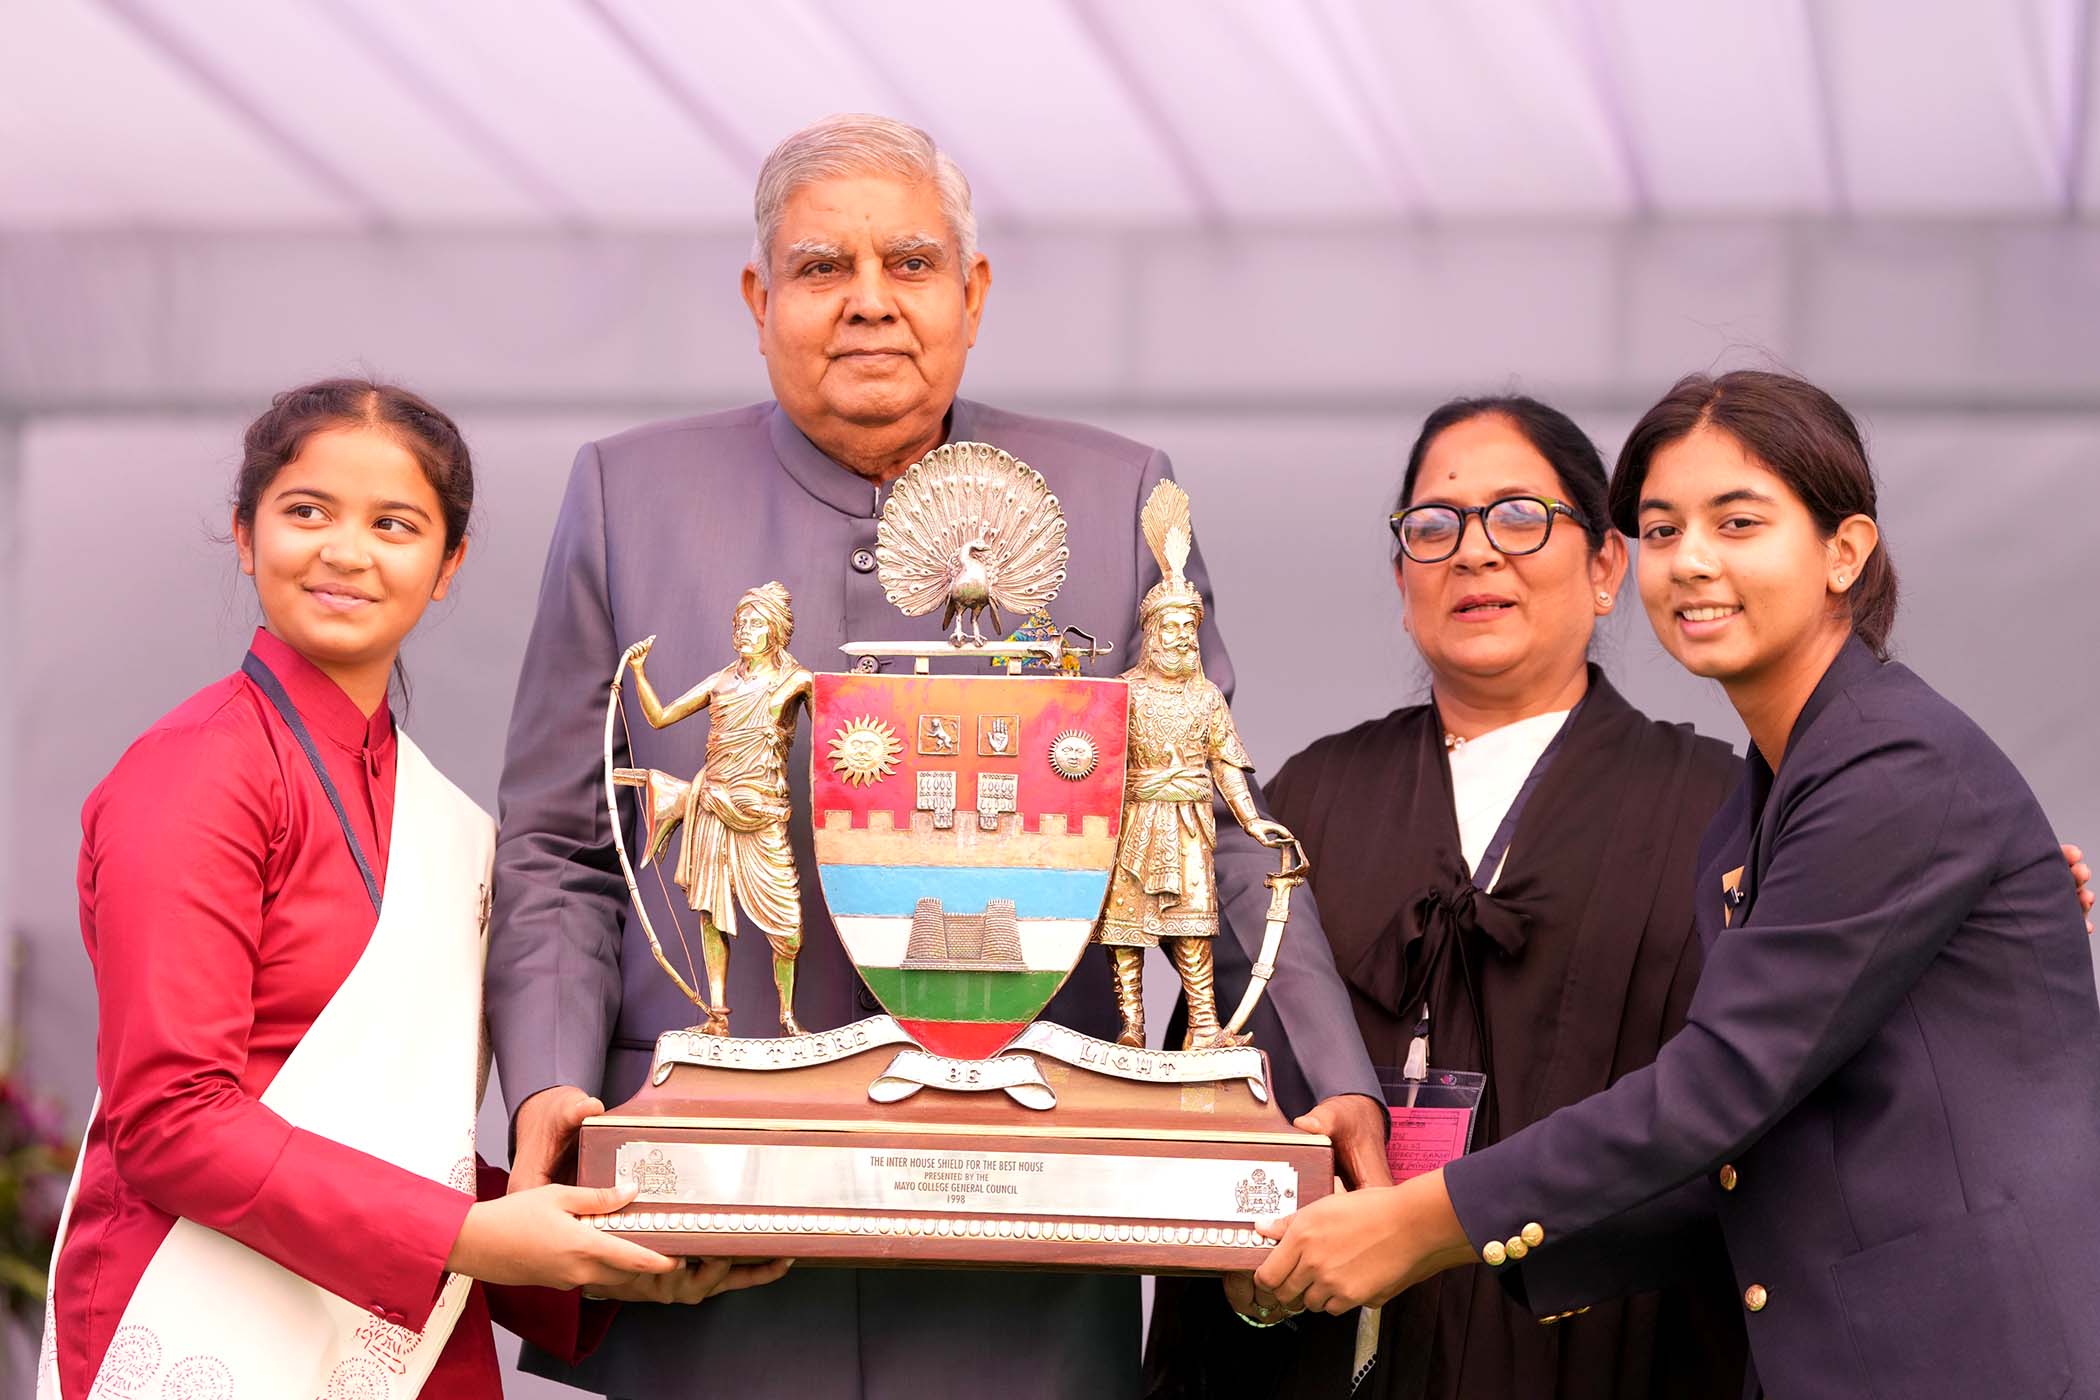 The Vice-President, Shri Jagdeep Dhankhar presenting awards to students at the Annual Prize Giving Ceremony of Mayo College Girls' School, Ajmer in Rajasthan on November 8, 2023.